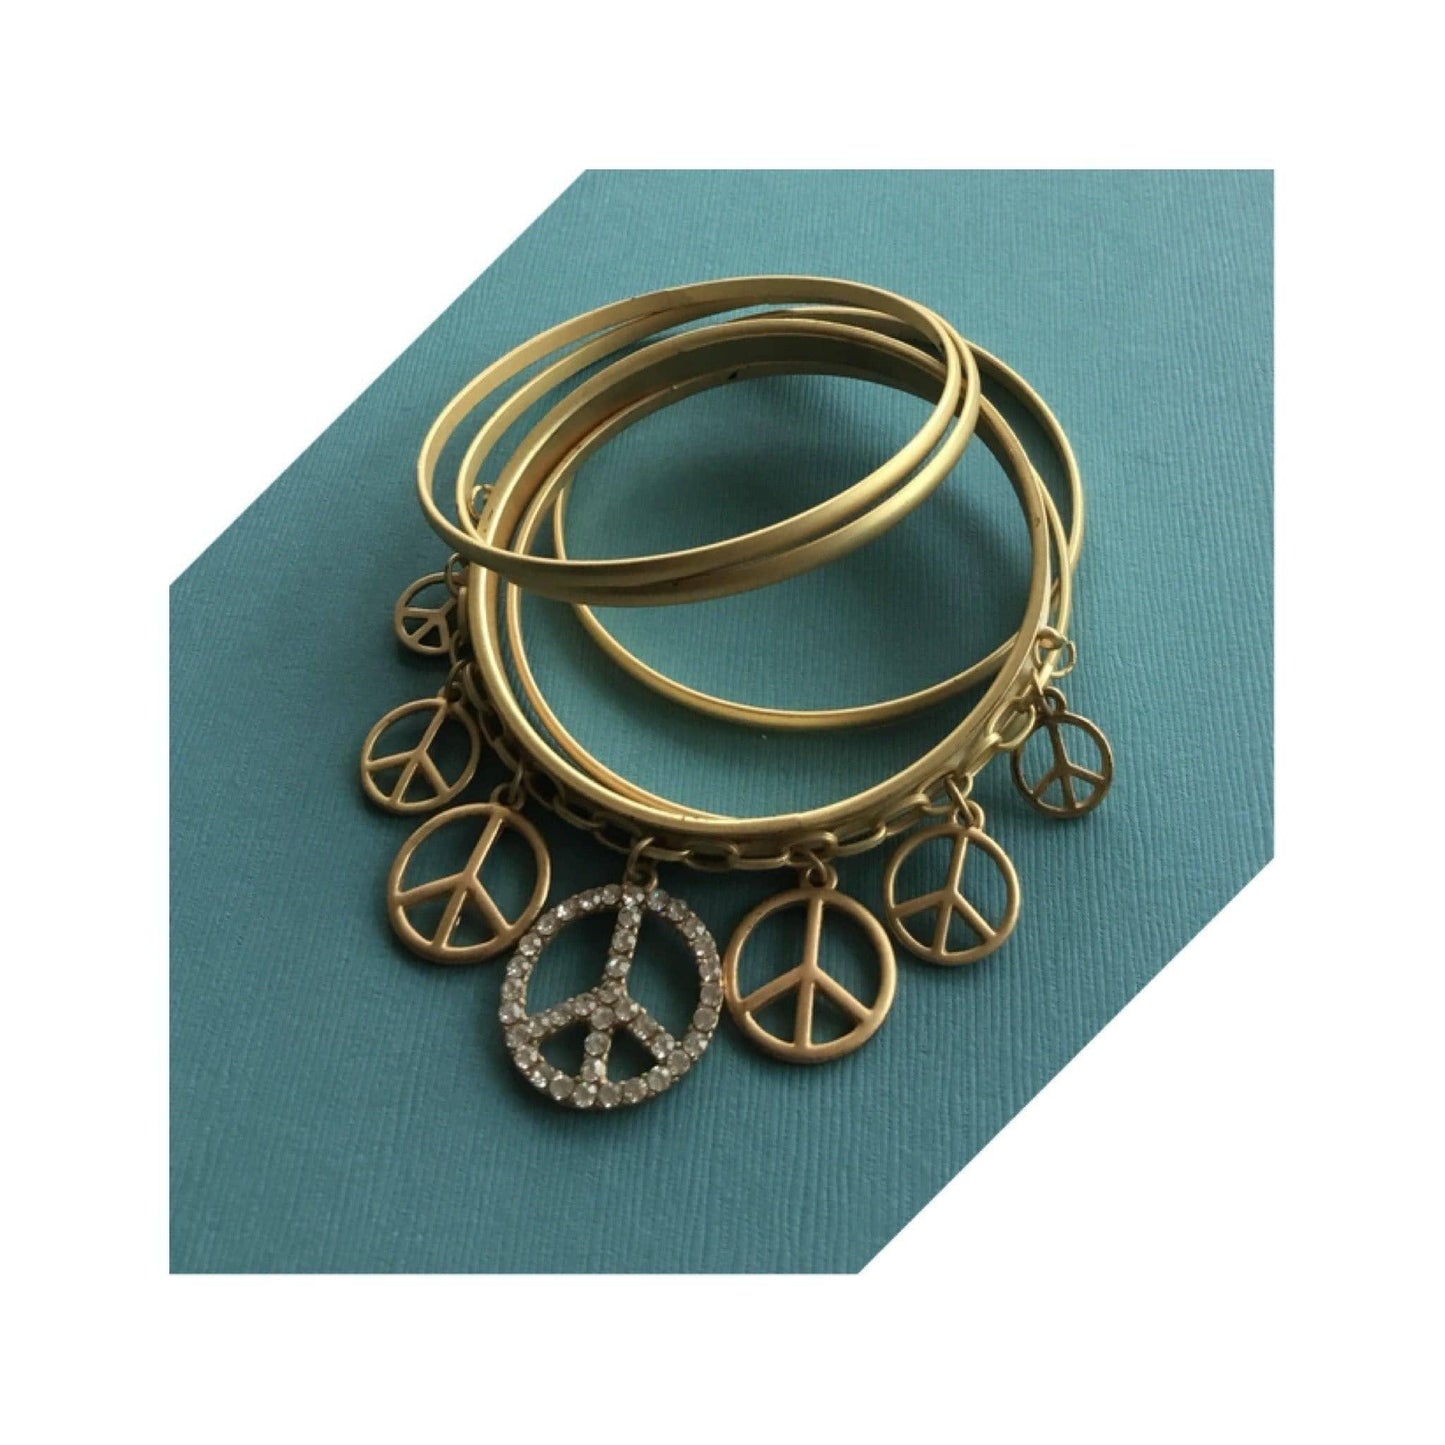 Truly eye-catching vintage stack bangles dangle peace charms